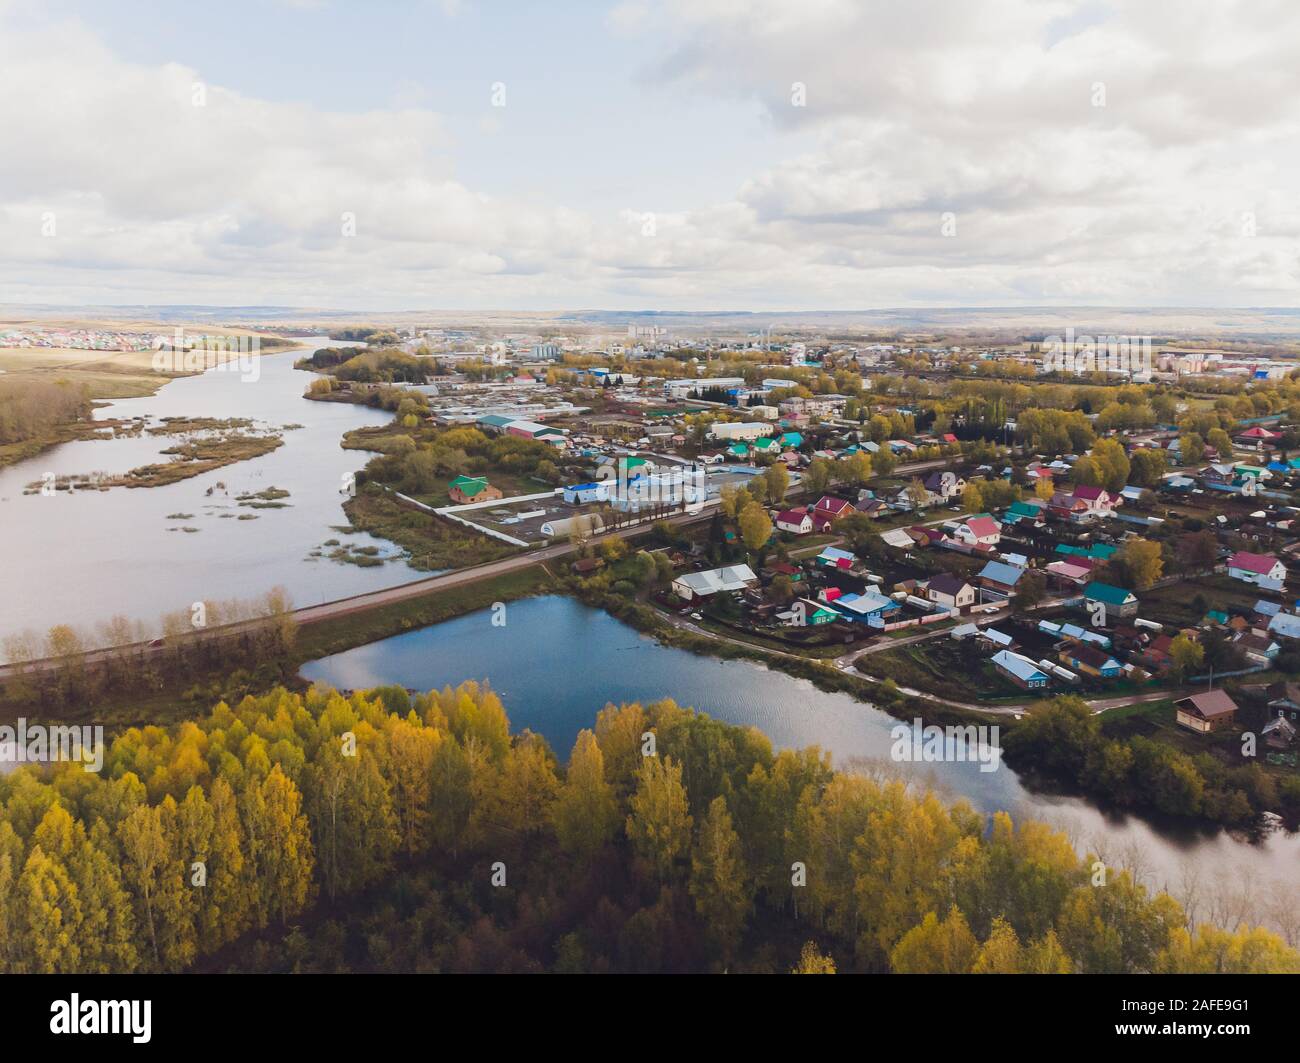 Chishmy city in the Republic of Bashkortostan. View from a small town Stock Photo